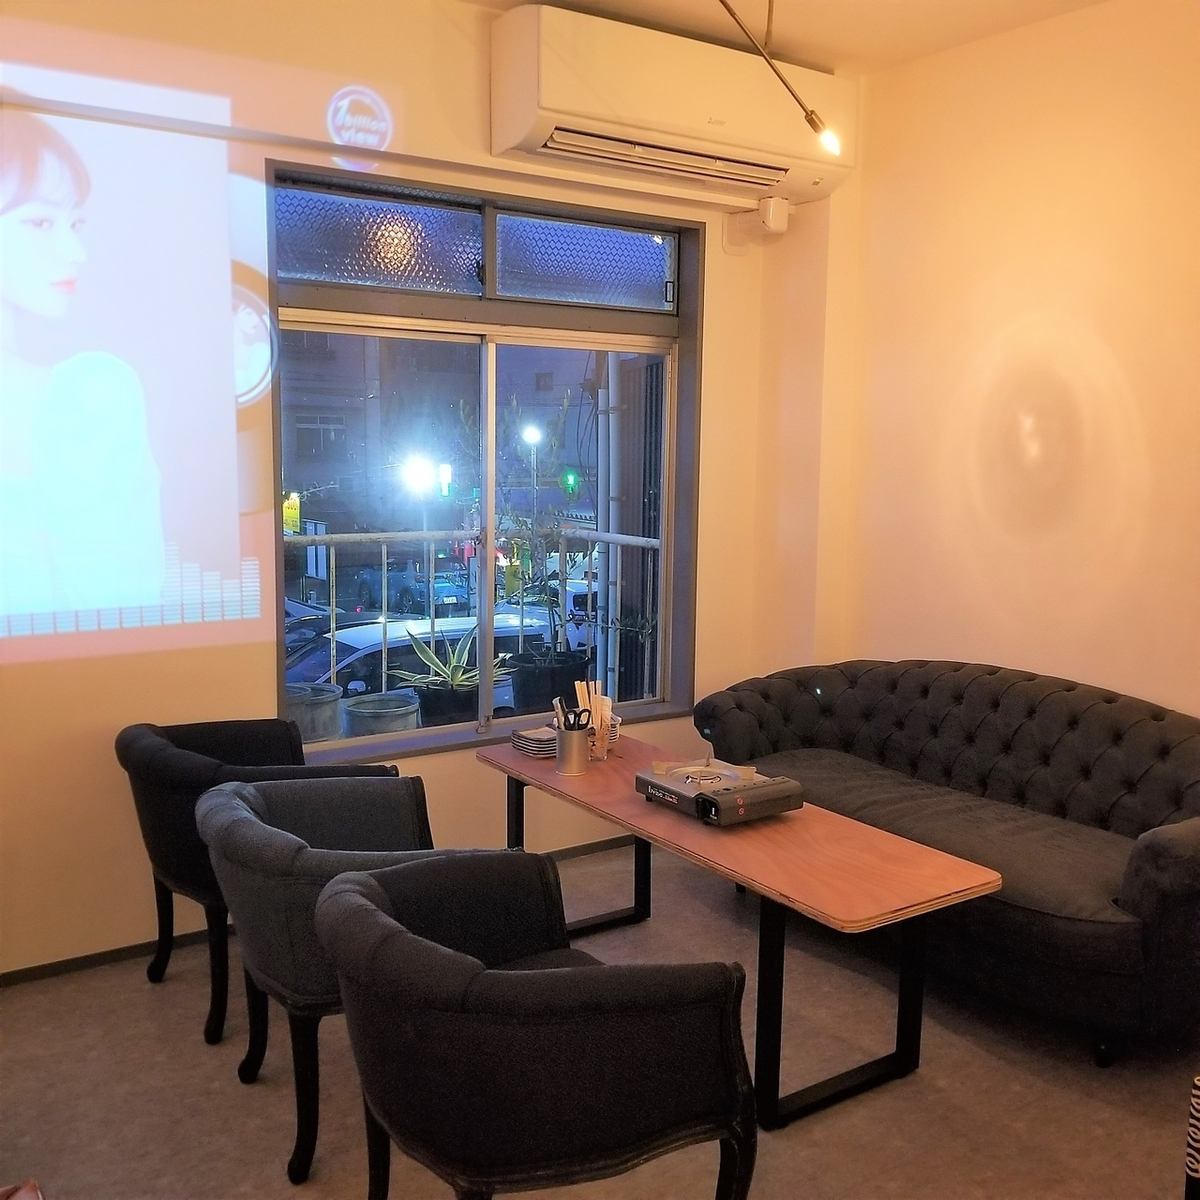 Popular 2nd floor sofa seat ☆ You can enjoy your meal slowly while watching the outside scenery and the image of the projector ♪